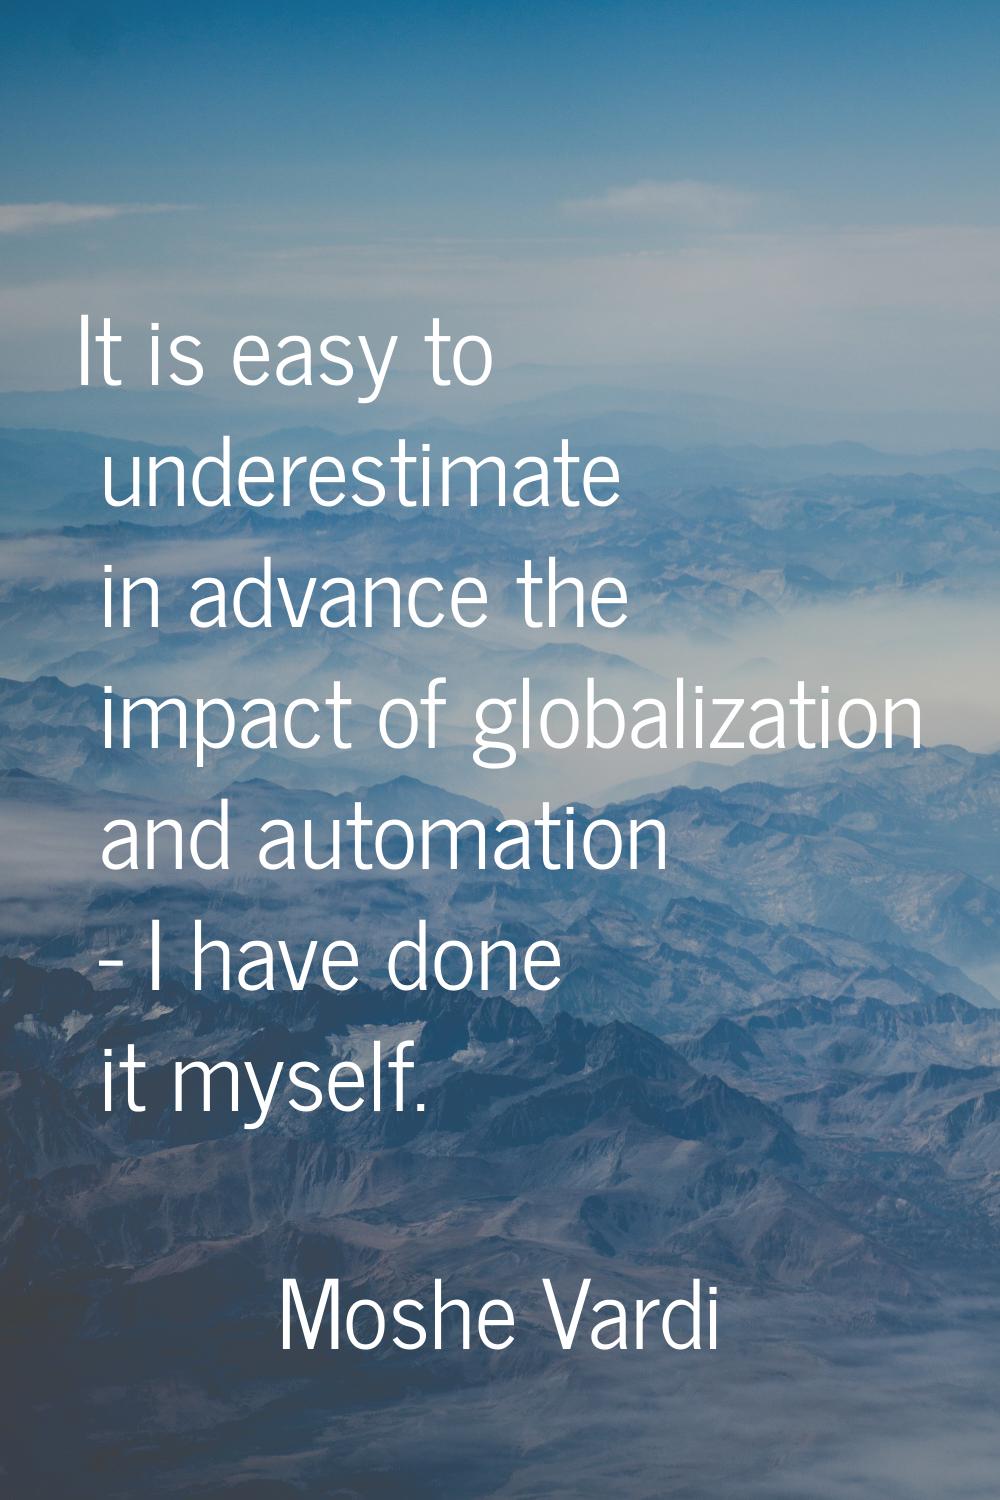 It is easy to underestimate in advance the impact of globalization and automation - I have done it 